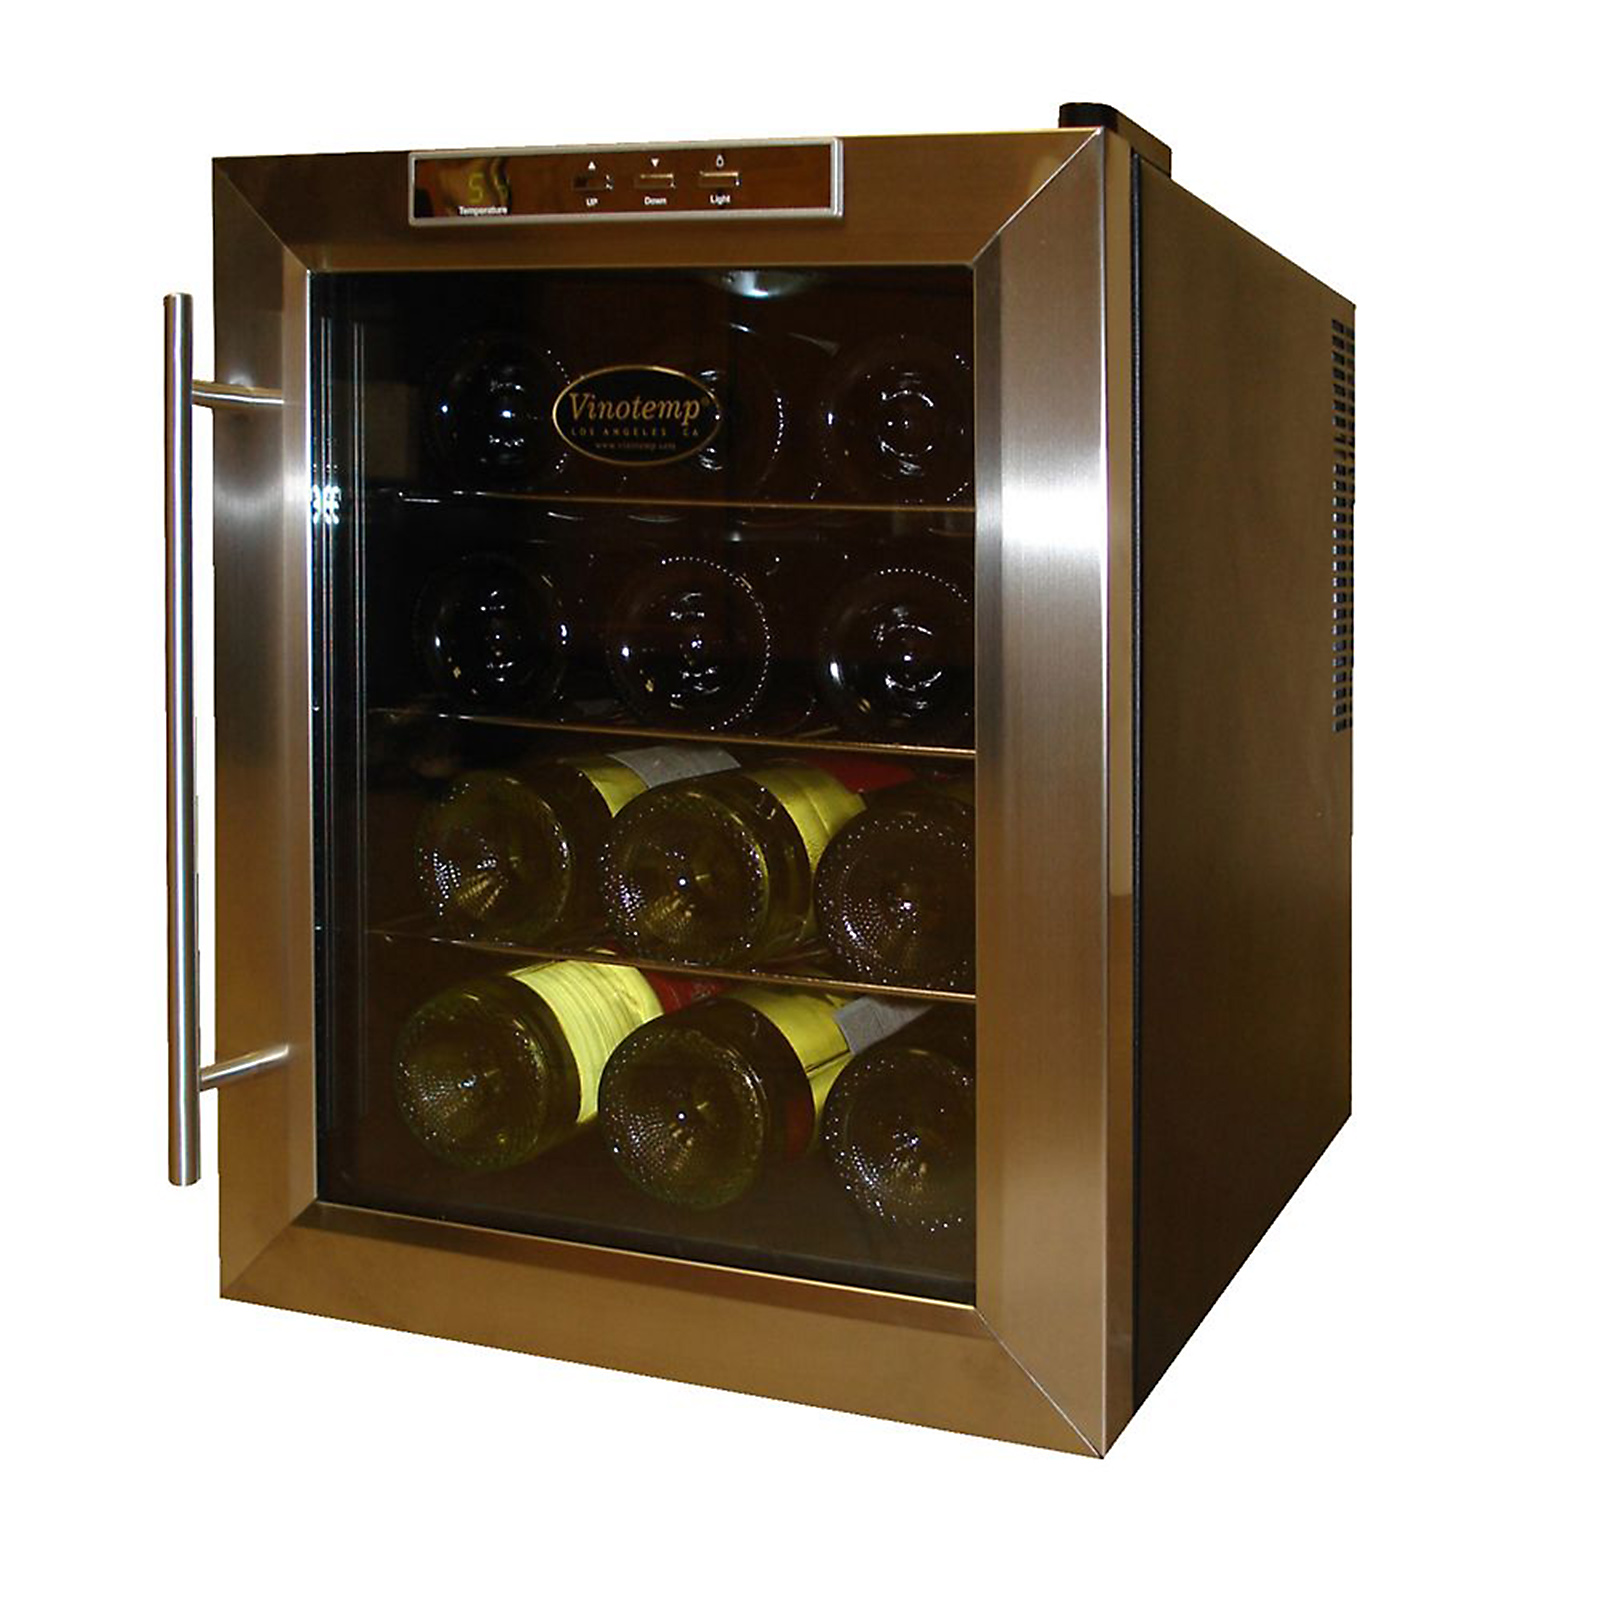 12 Bottle Thermo-Electric Wine Cooler.